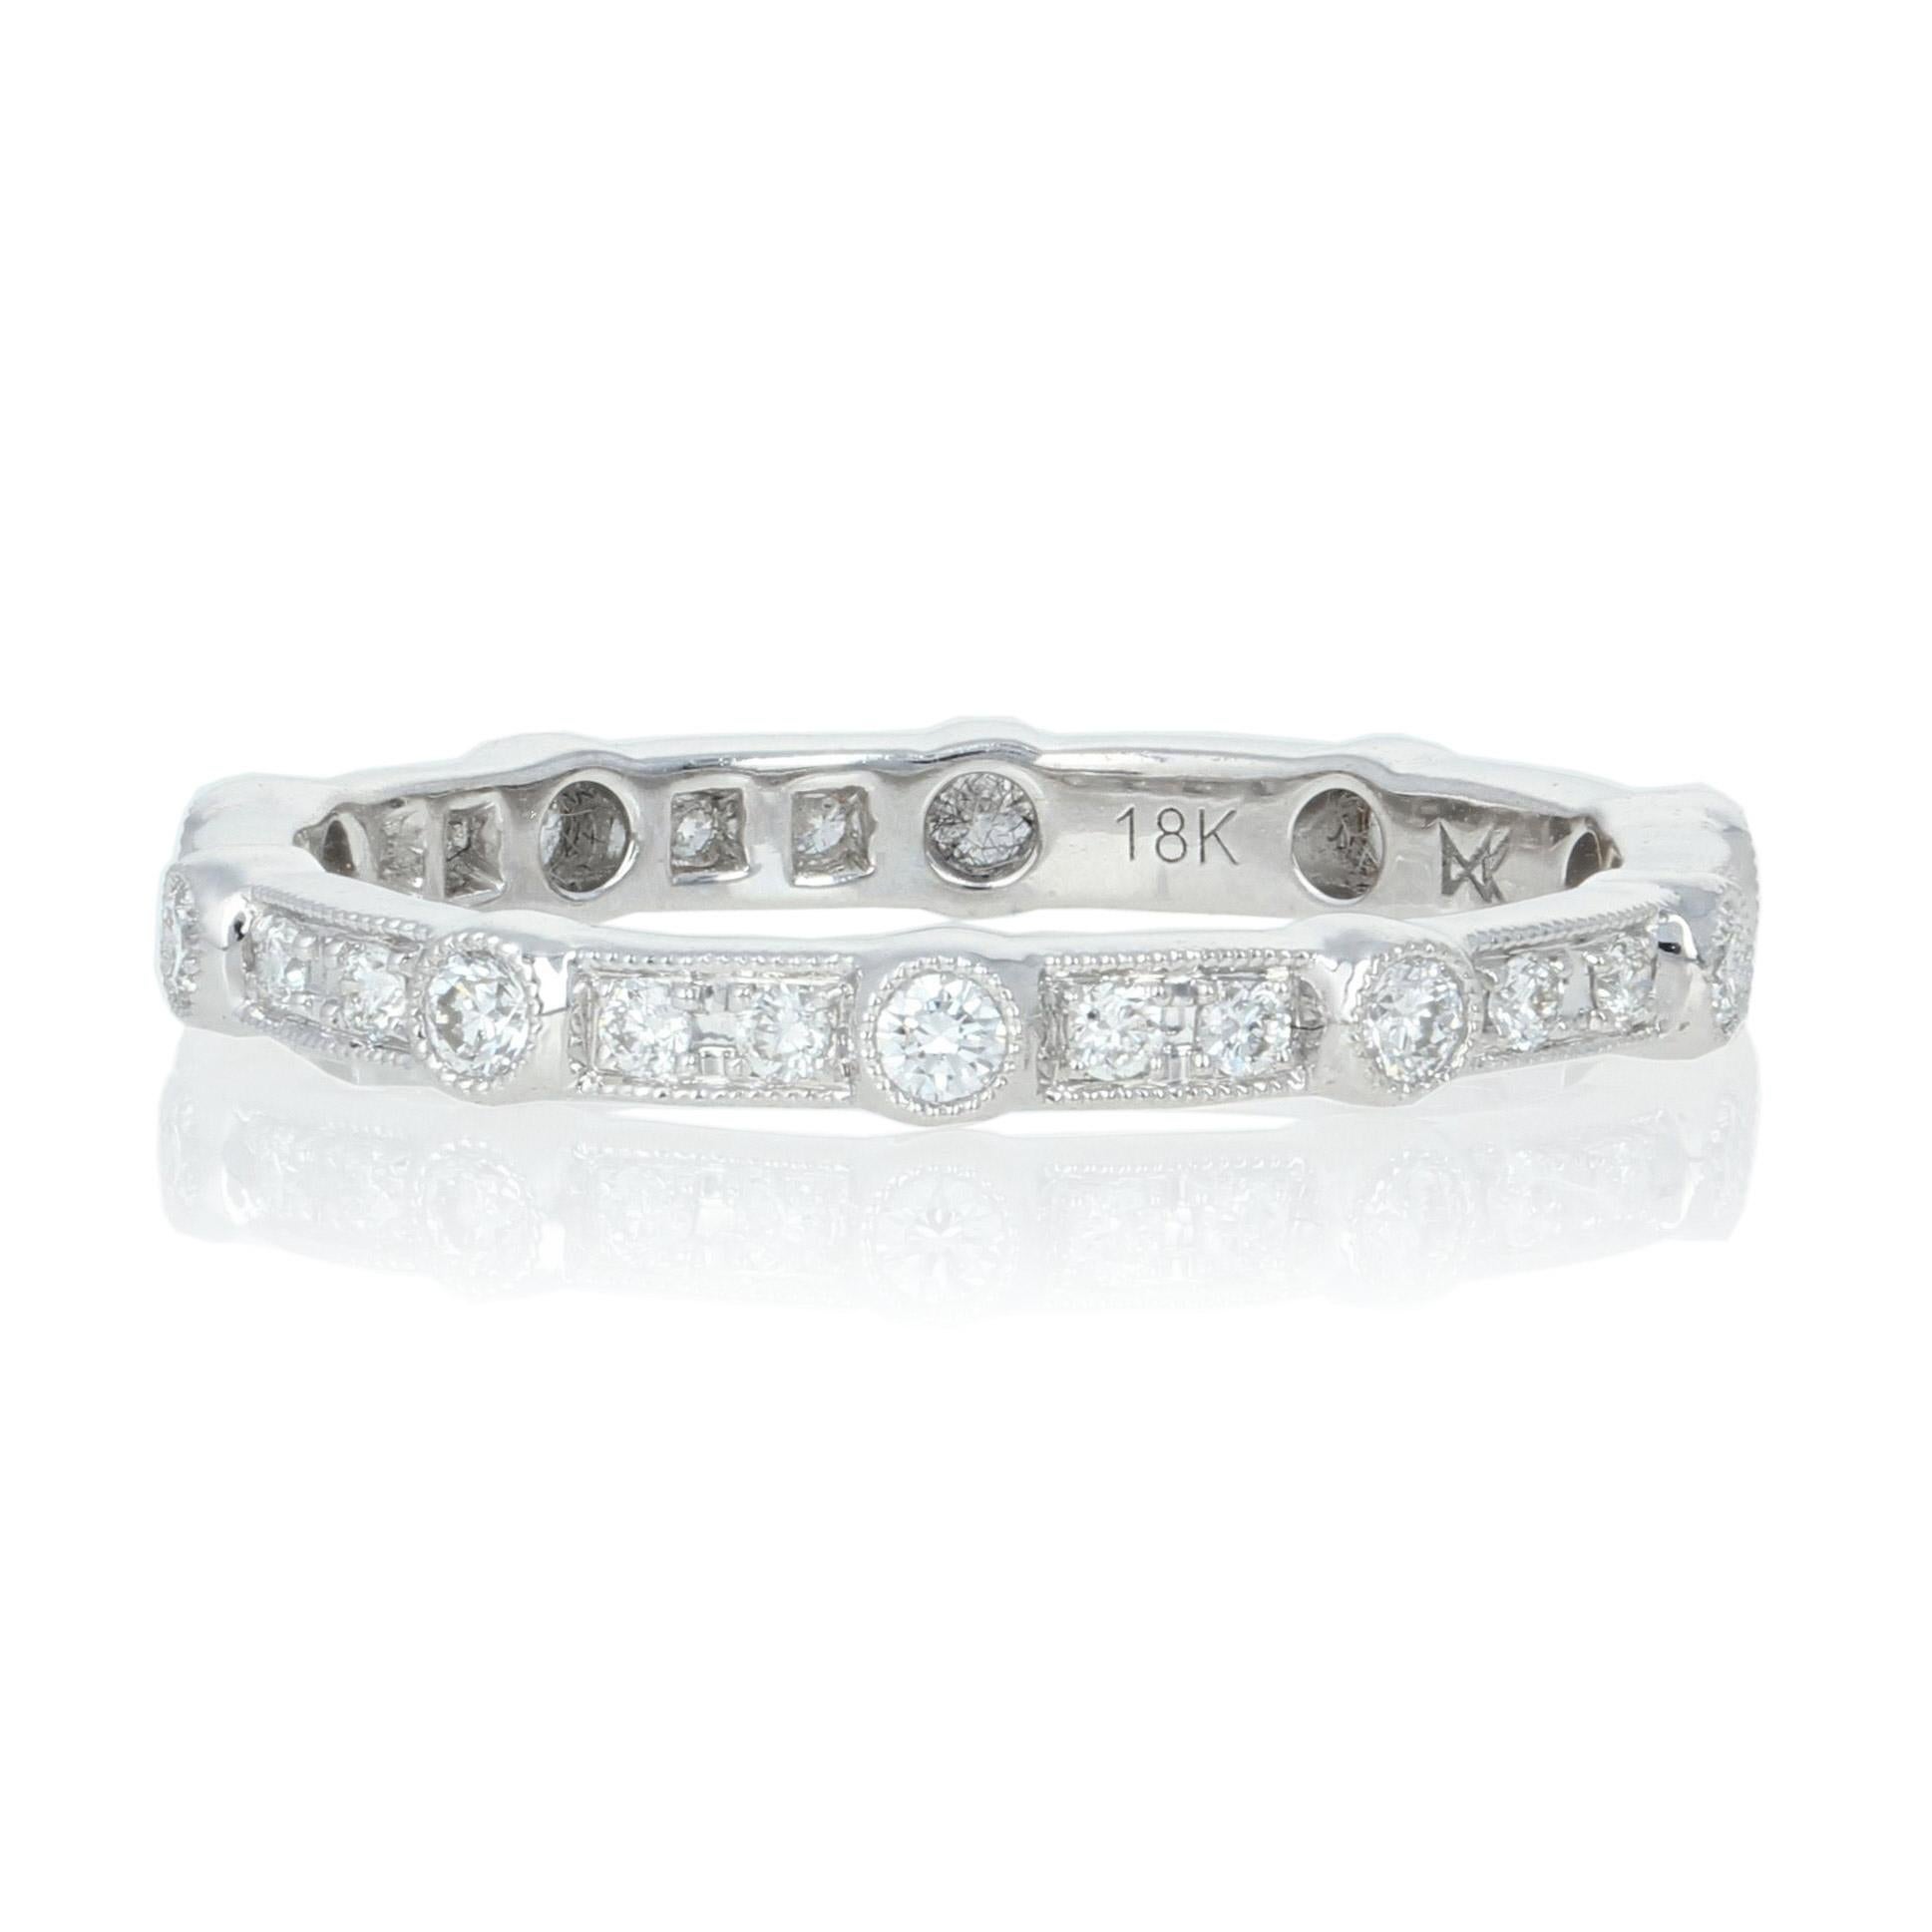 Size: 6 1/2

Brand: Beverly K.

Metal Content: Guaranteed 18k Gold as stamped

Stone Information: 
Natural Diamonds  
Clarity: VS1 - VS2 
Color: F
Cut: Round Brilliant
Total Carats: 0.34ctw

Style: Eternity Wedding Band with Diamonds
Face Height